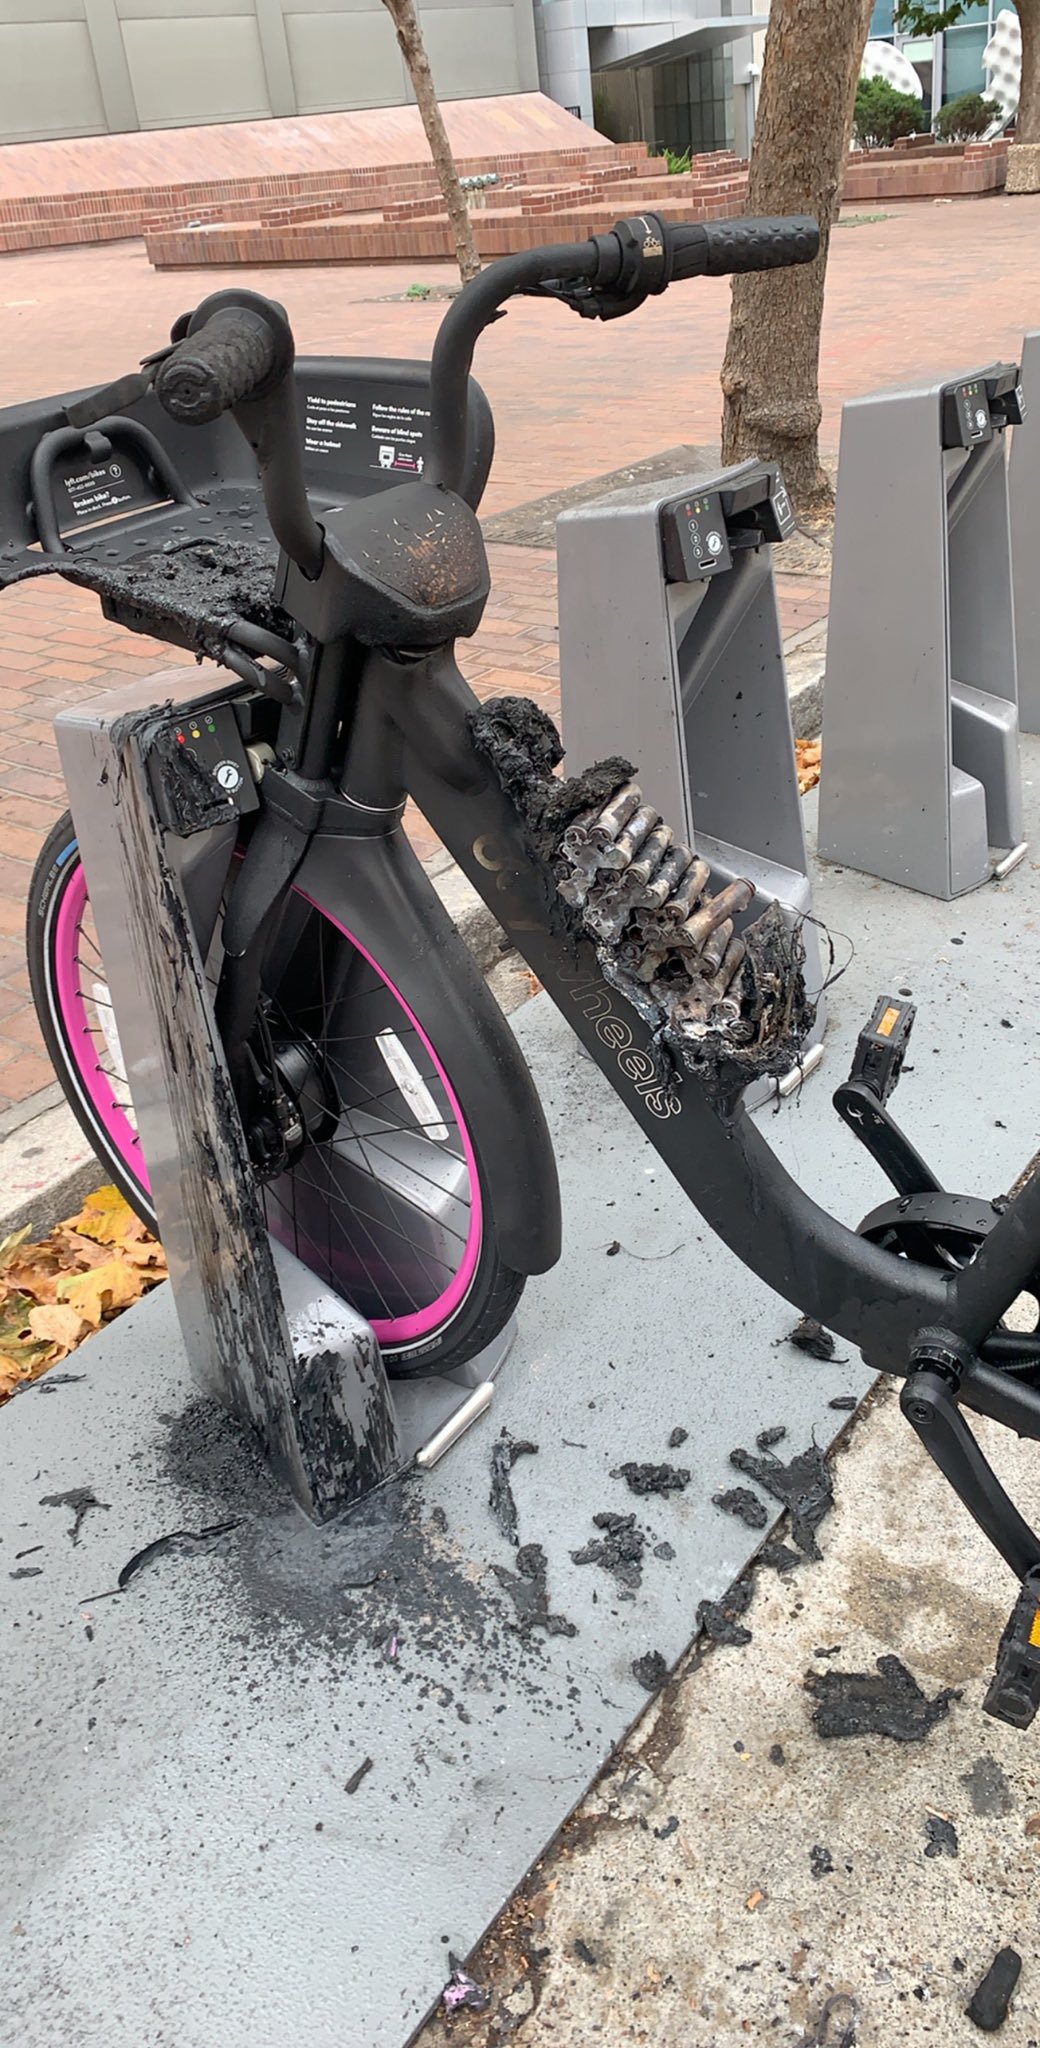 Vandalism a possible cause of Lyft e-bike fires | Bicycle Retailer and Industry News